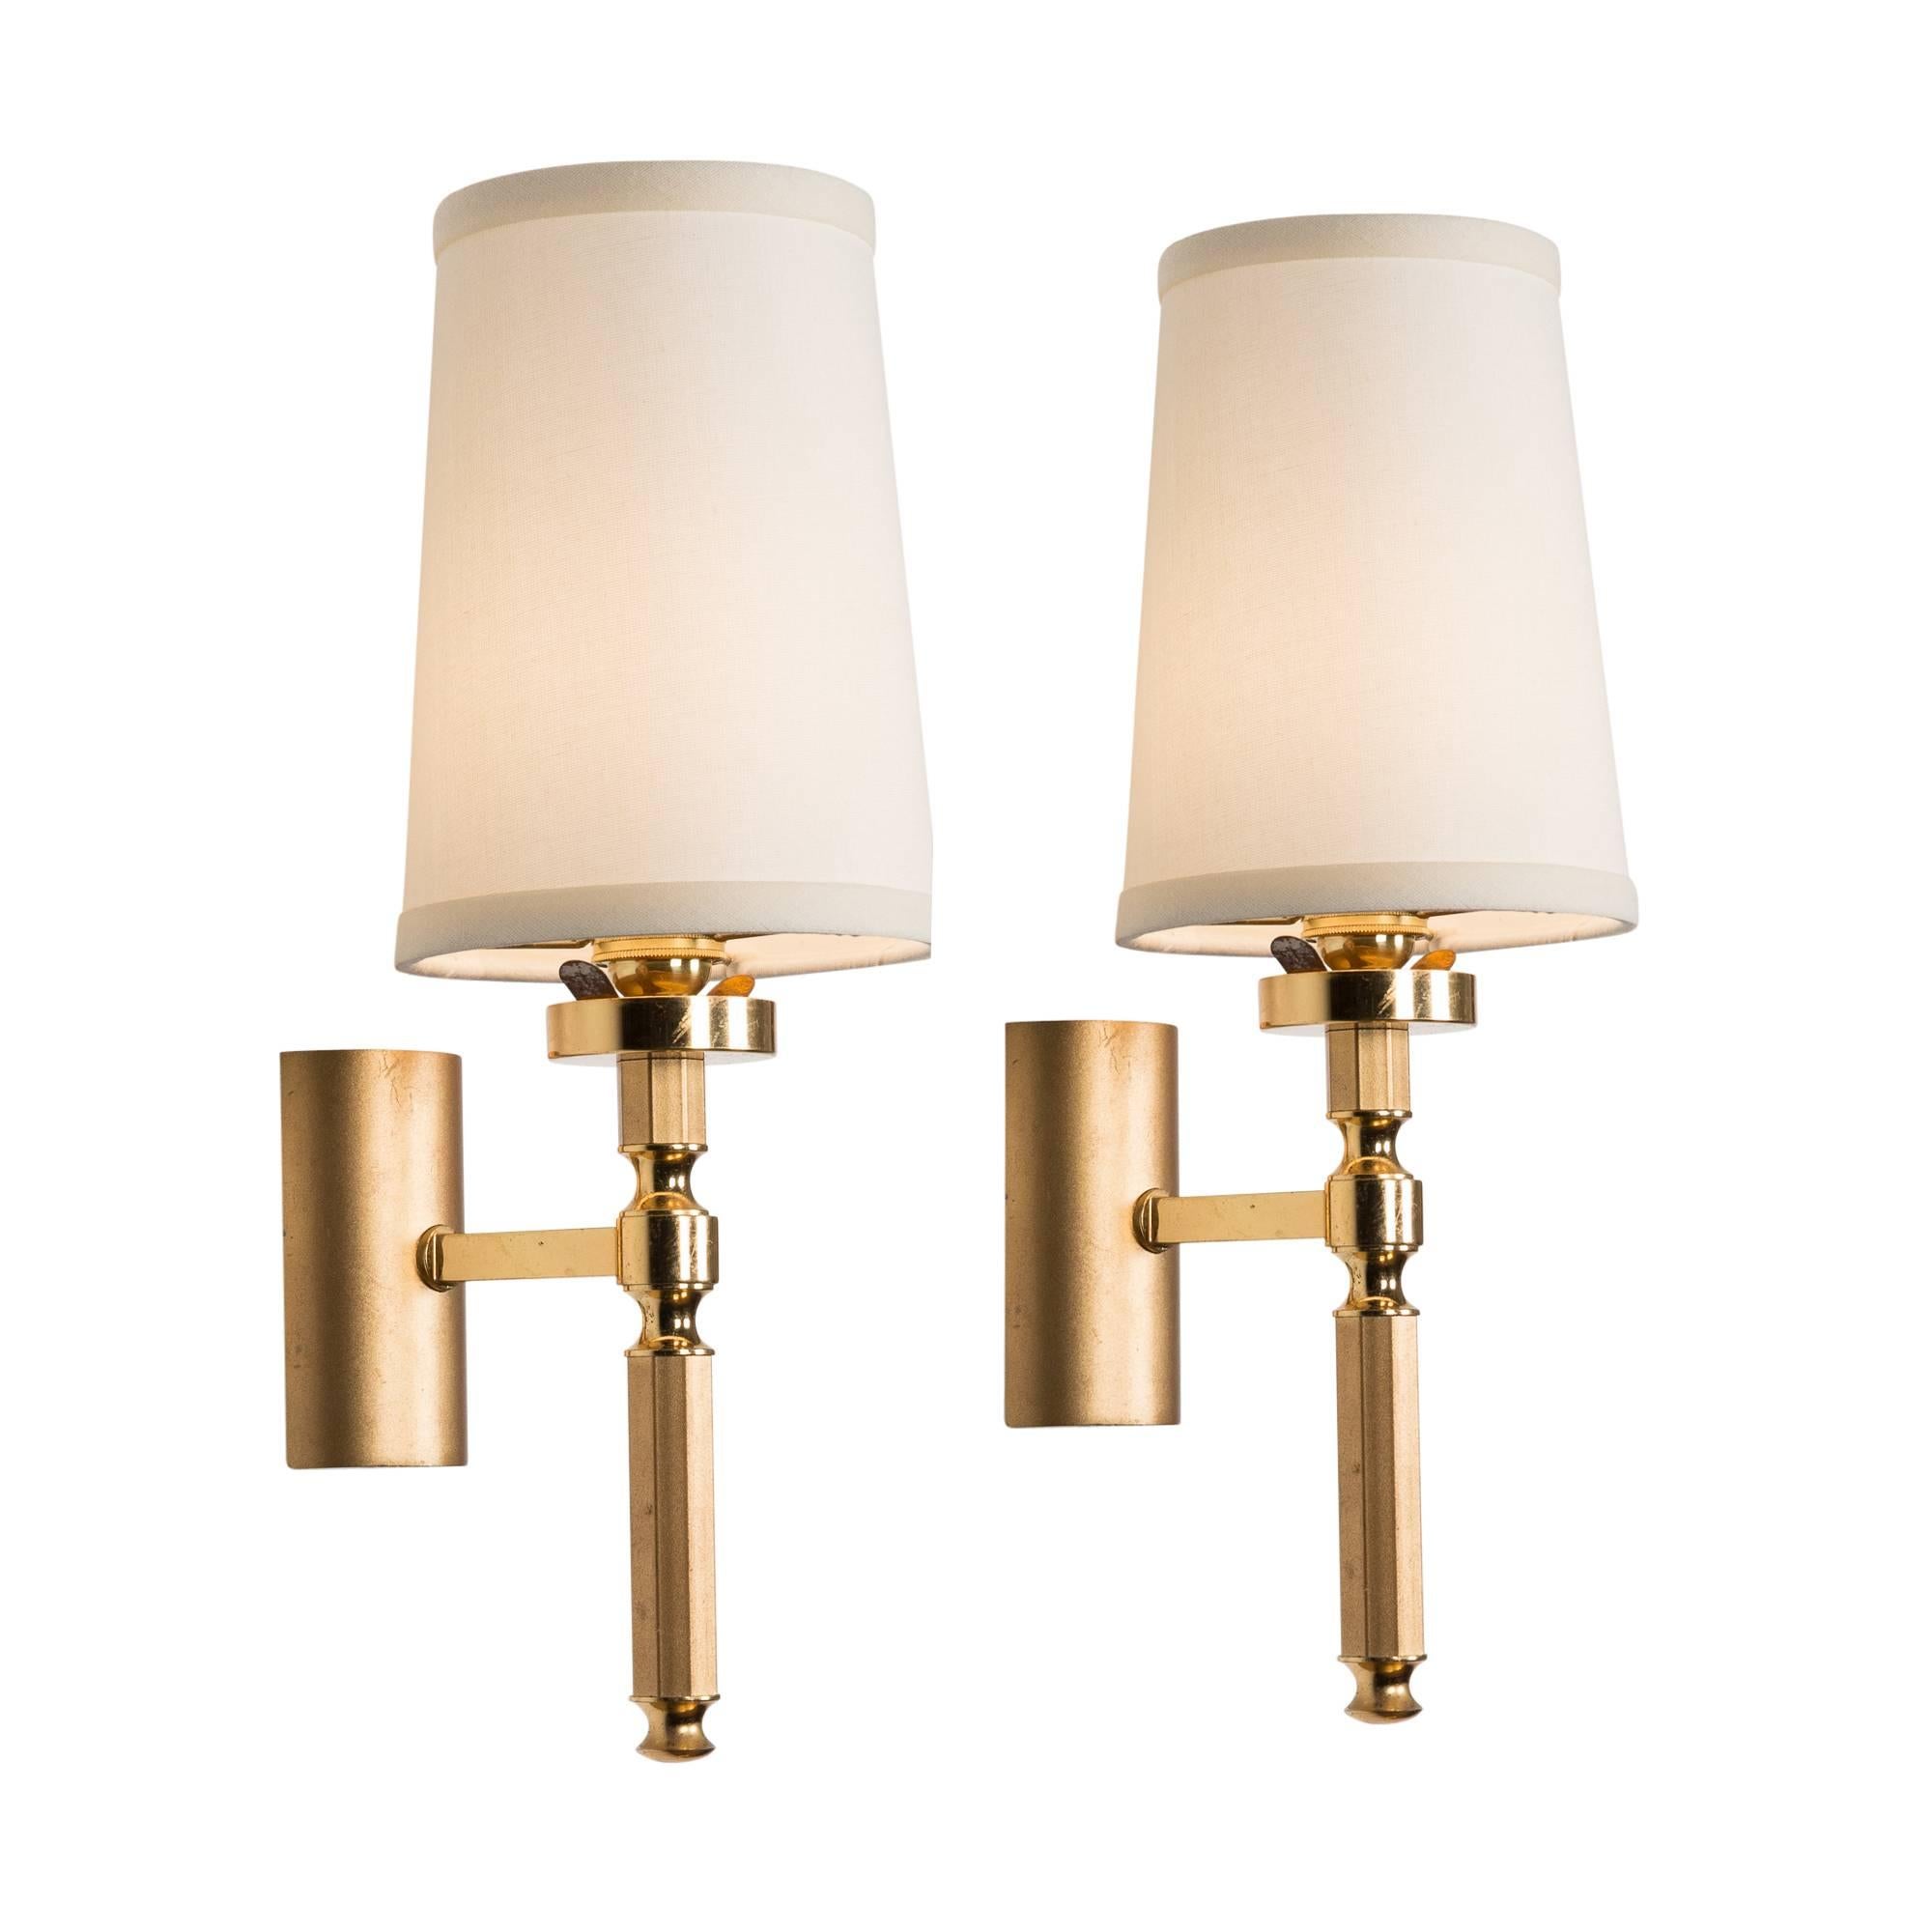 Pair of Single Arm Brass Post Wall Sconces, French, 1960s For Sale